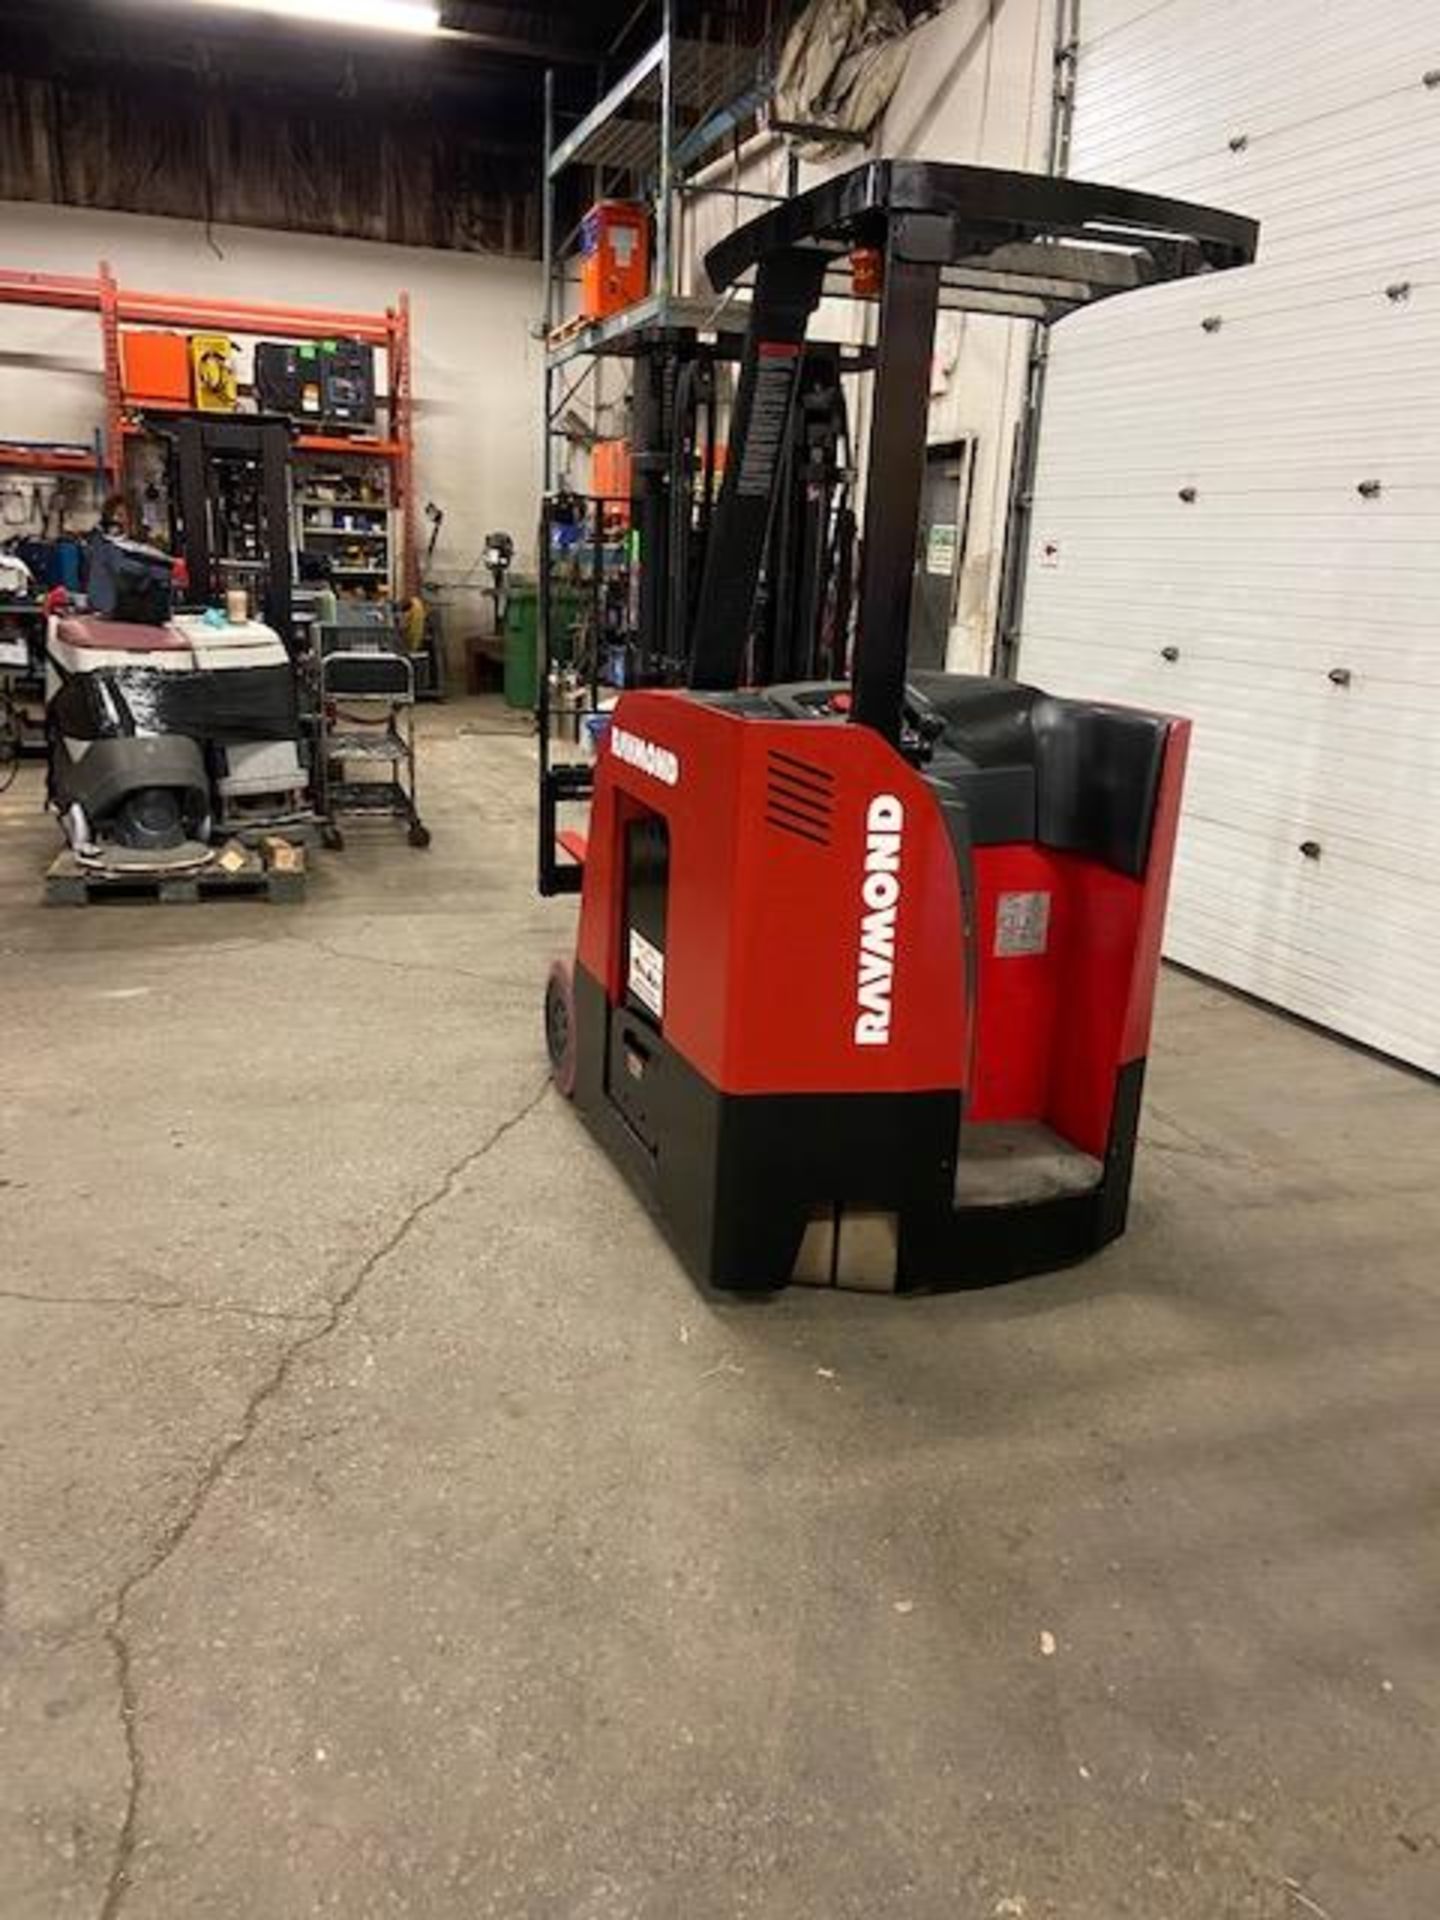 FREE CUSTOMS - 2013 Raymond 5000lbs Capacity Stand On Forklift Electric with 3-STAGE MAST sideshift - Image 3 of 3